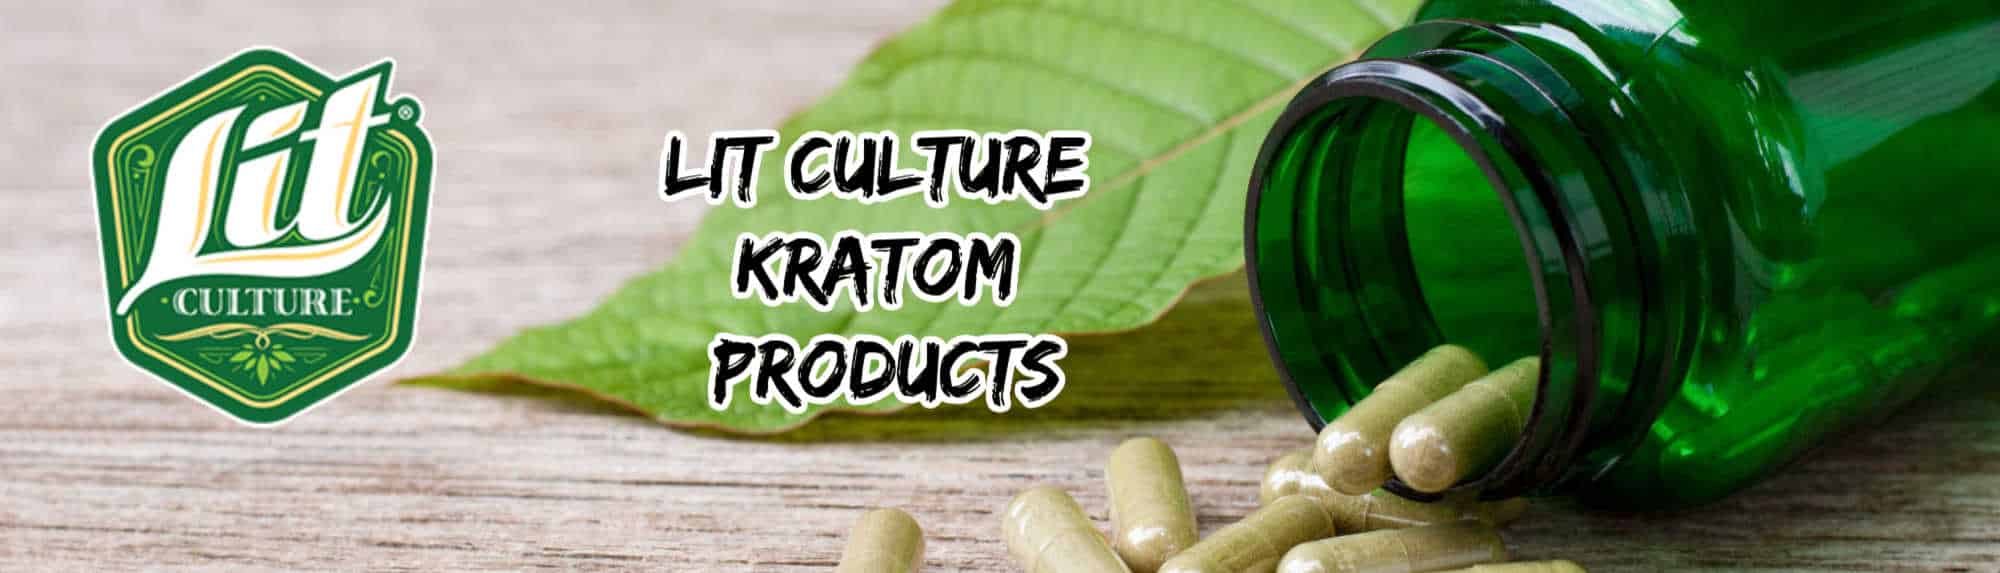 image of kratom products of lit culture